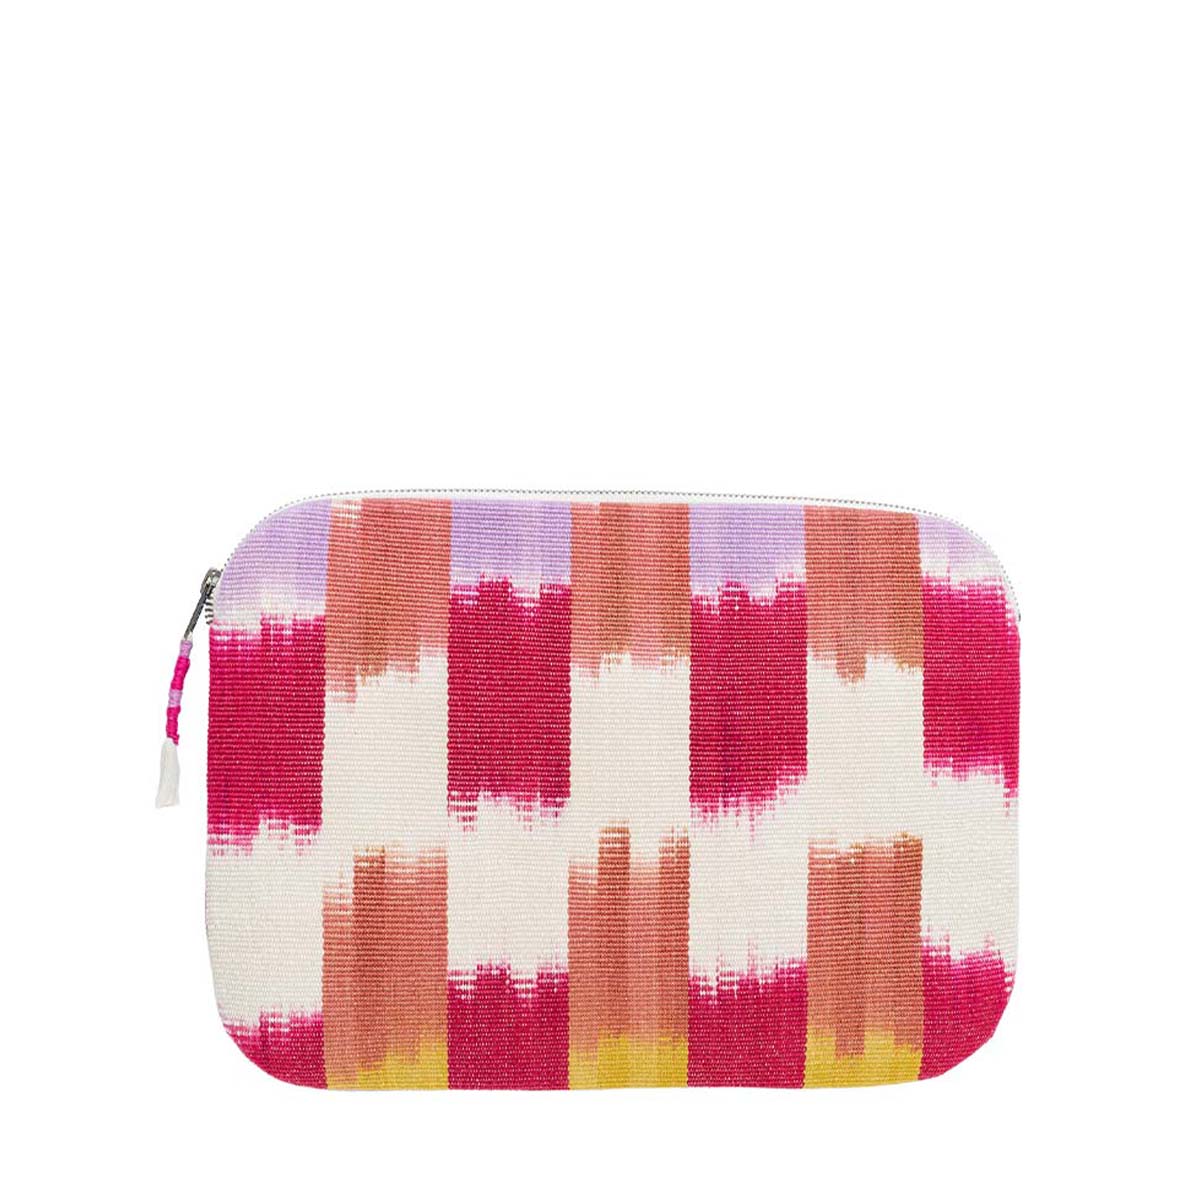 The Elenita Laptop Case in Raspberry Paleta. The front has a watercolor red, purple, yellow, and orange pattern, and a mini woven tassel attached to the zipper.